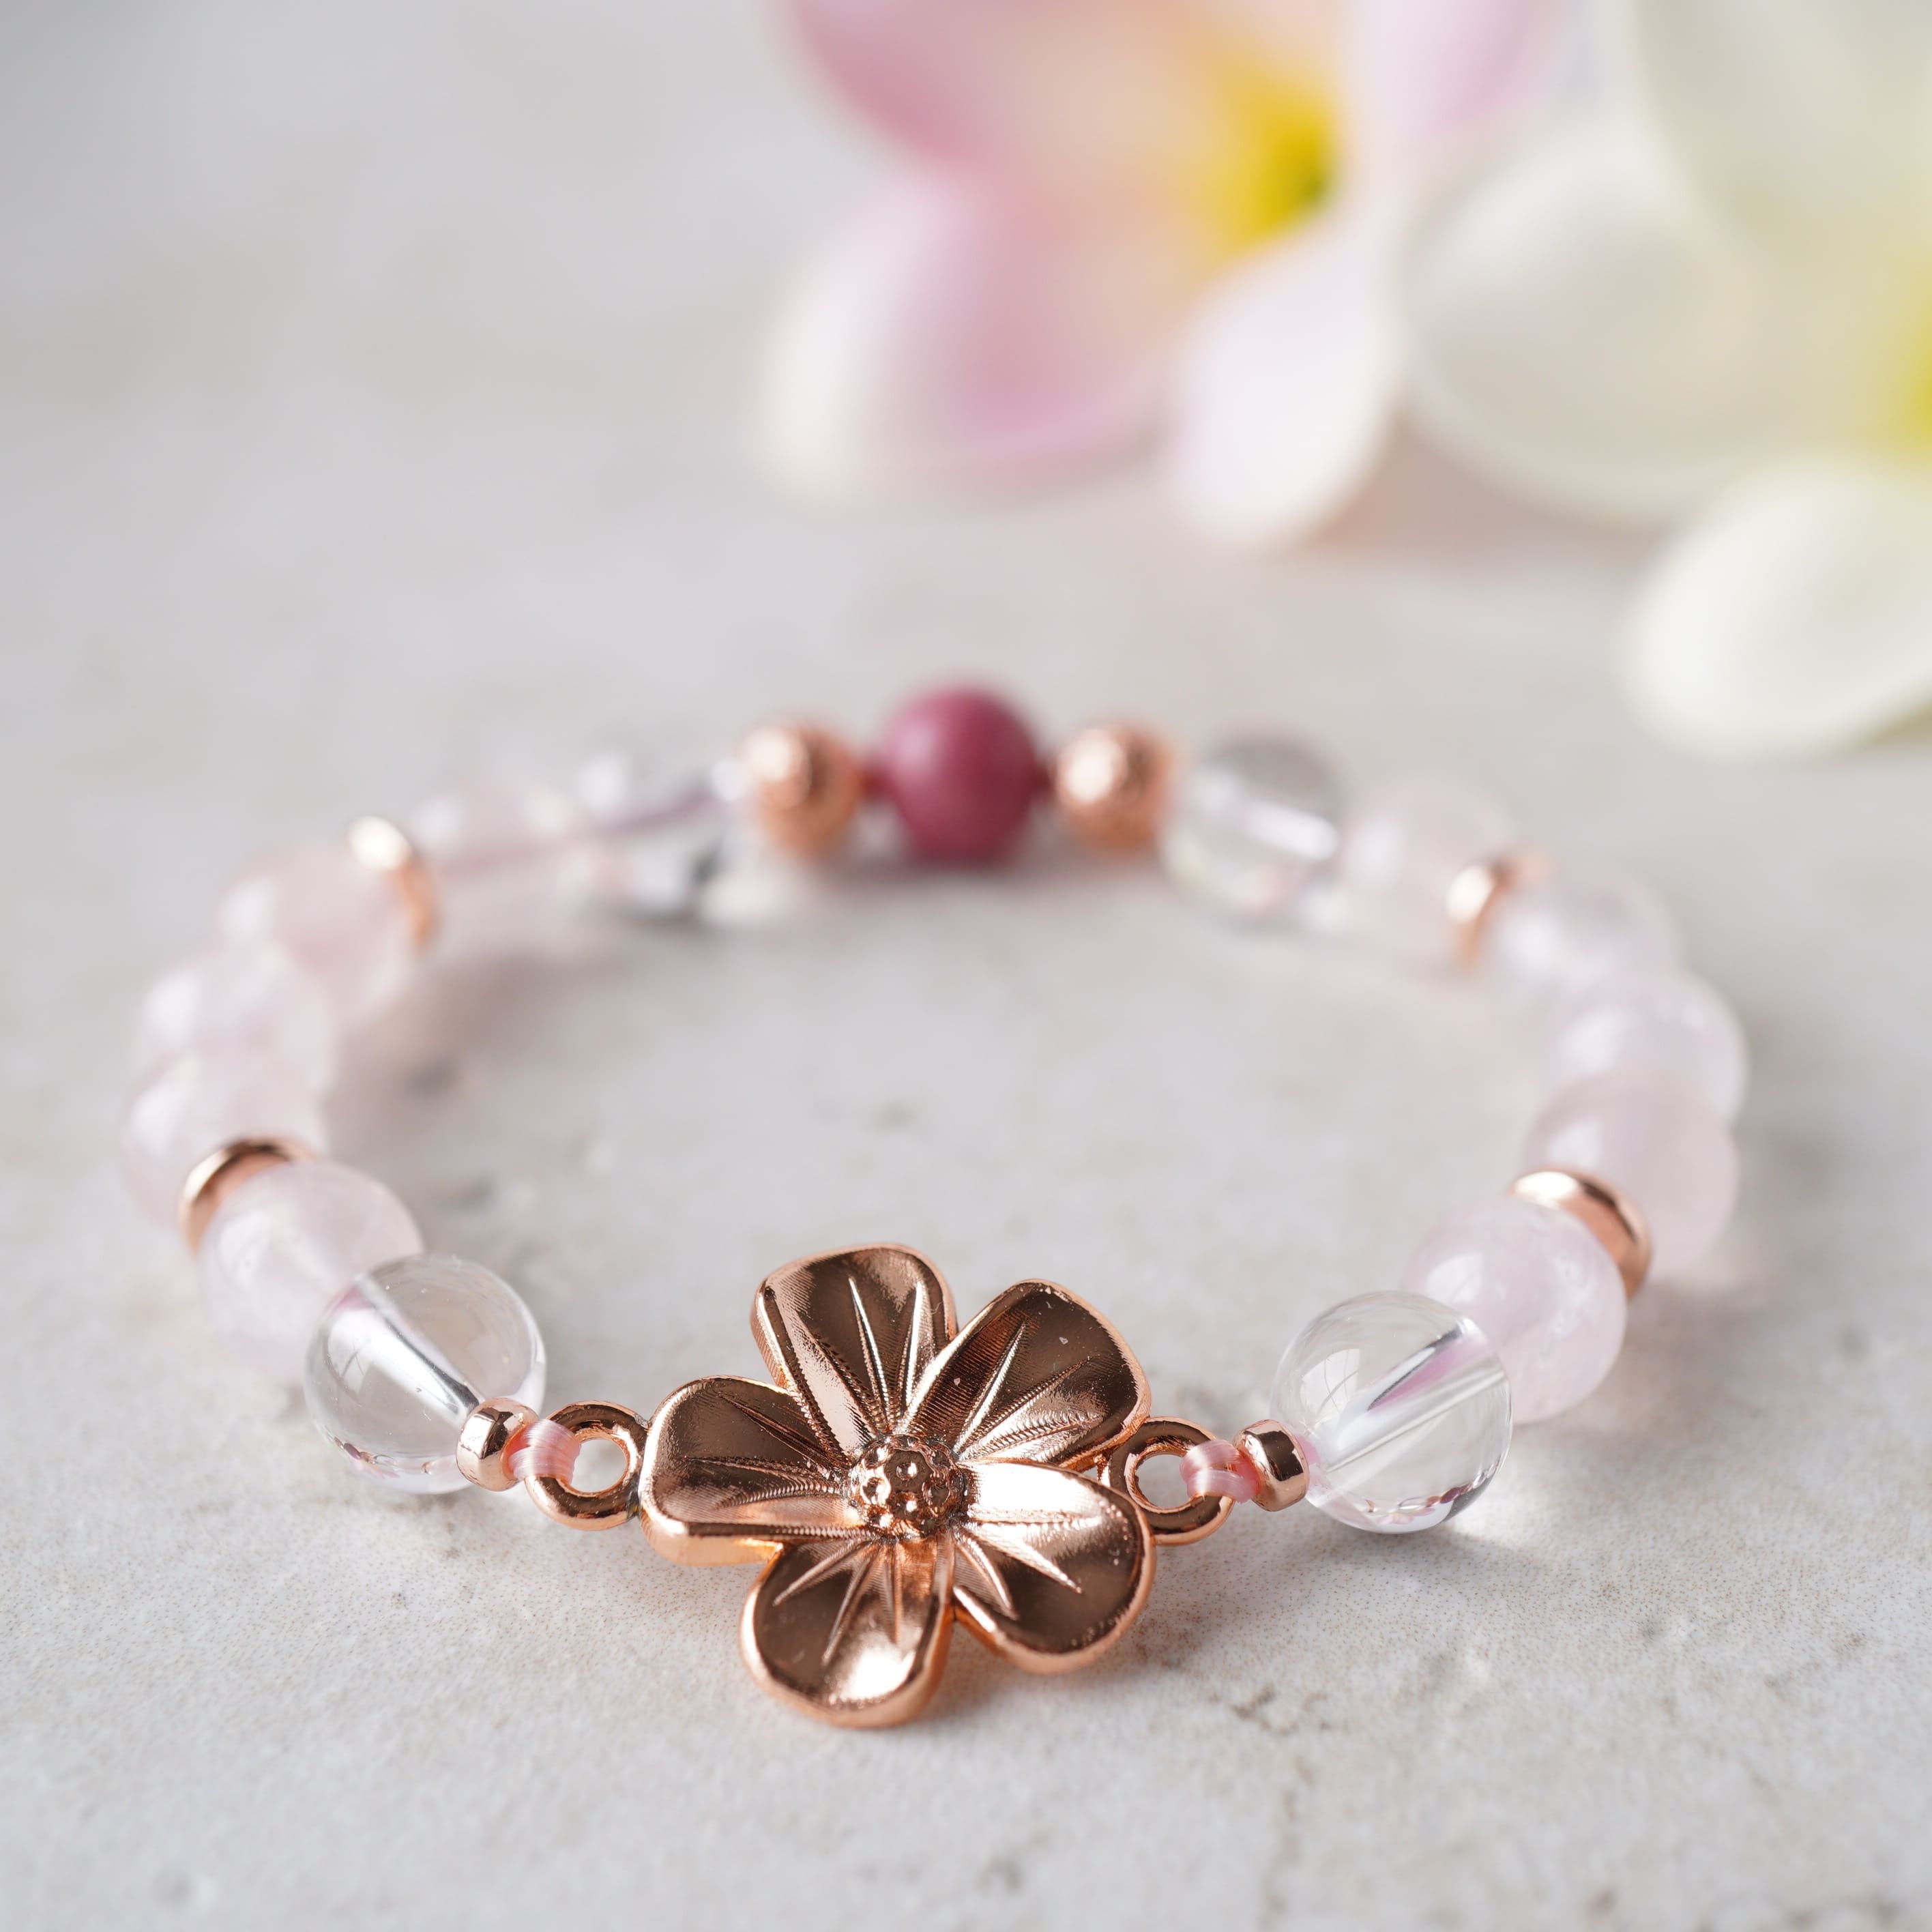 Gorgeous Charm Bracelet Pandora Like, Pretty Pink DANGLE Dahlia/camilla  Flower, Cute Popular Charms, Rose Gold/adjustable, Gift for Her 